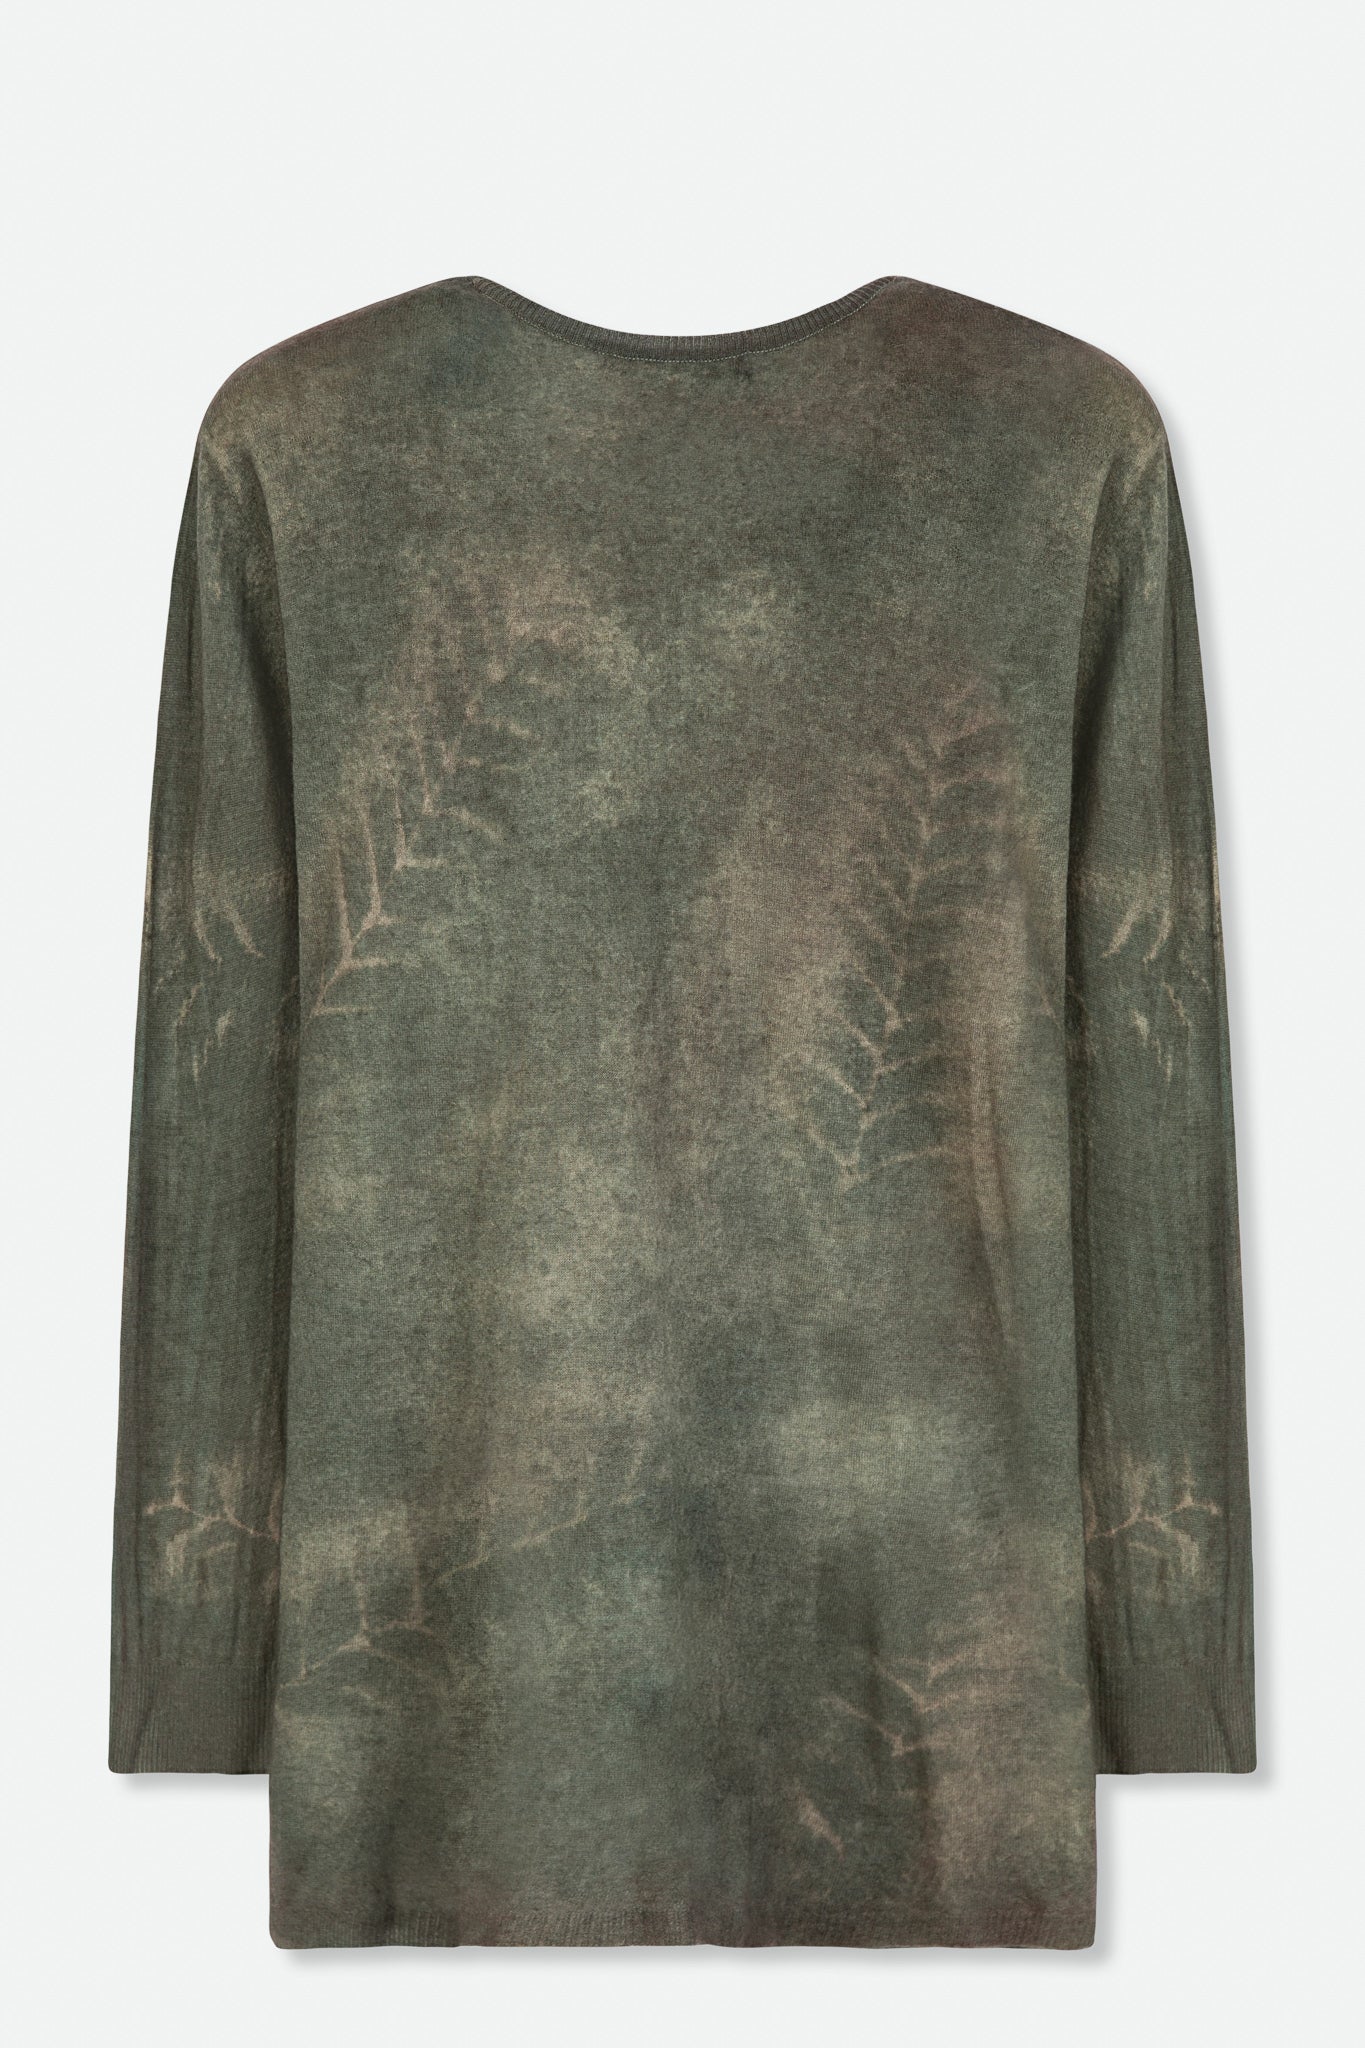 SHARA CREW TOP IN HAND-DYED LIGHTWEIGHT CASHMERE - Jarbo